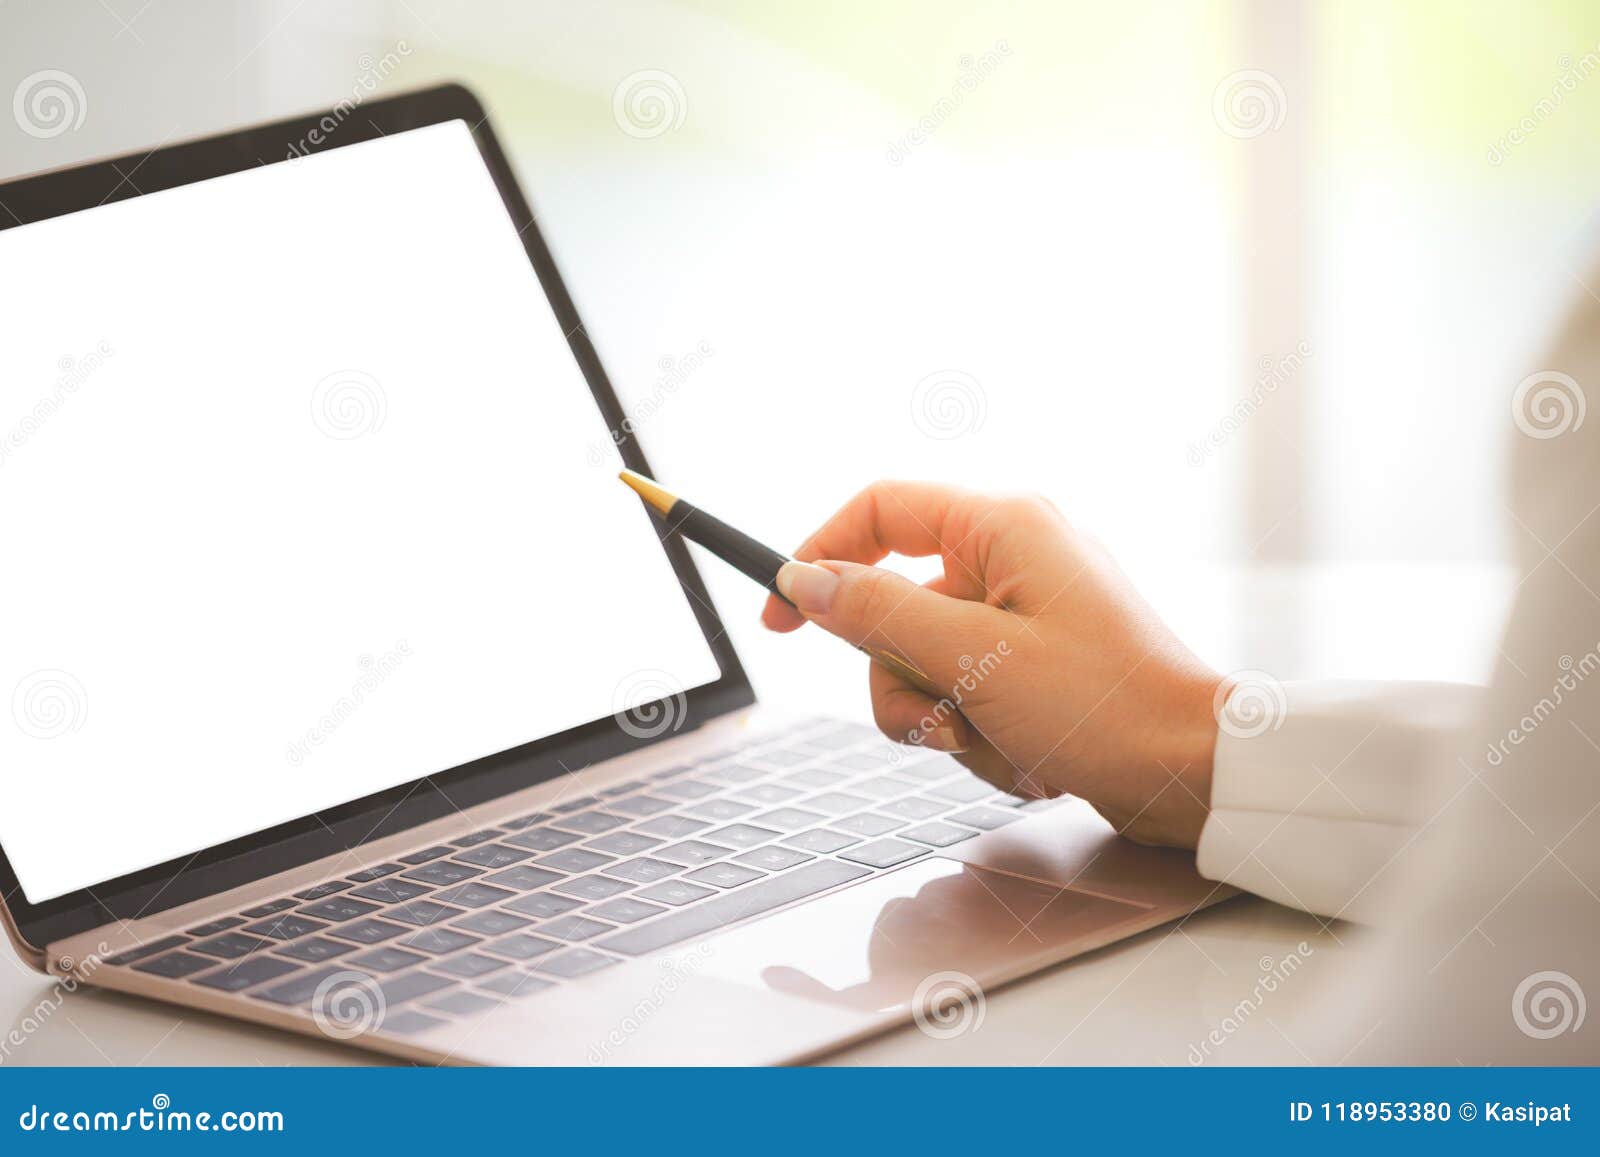 hand business woman holding pen on screen labtop